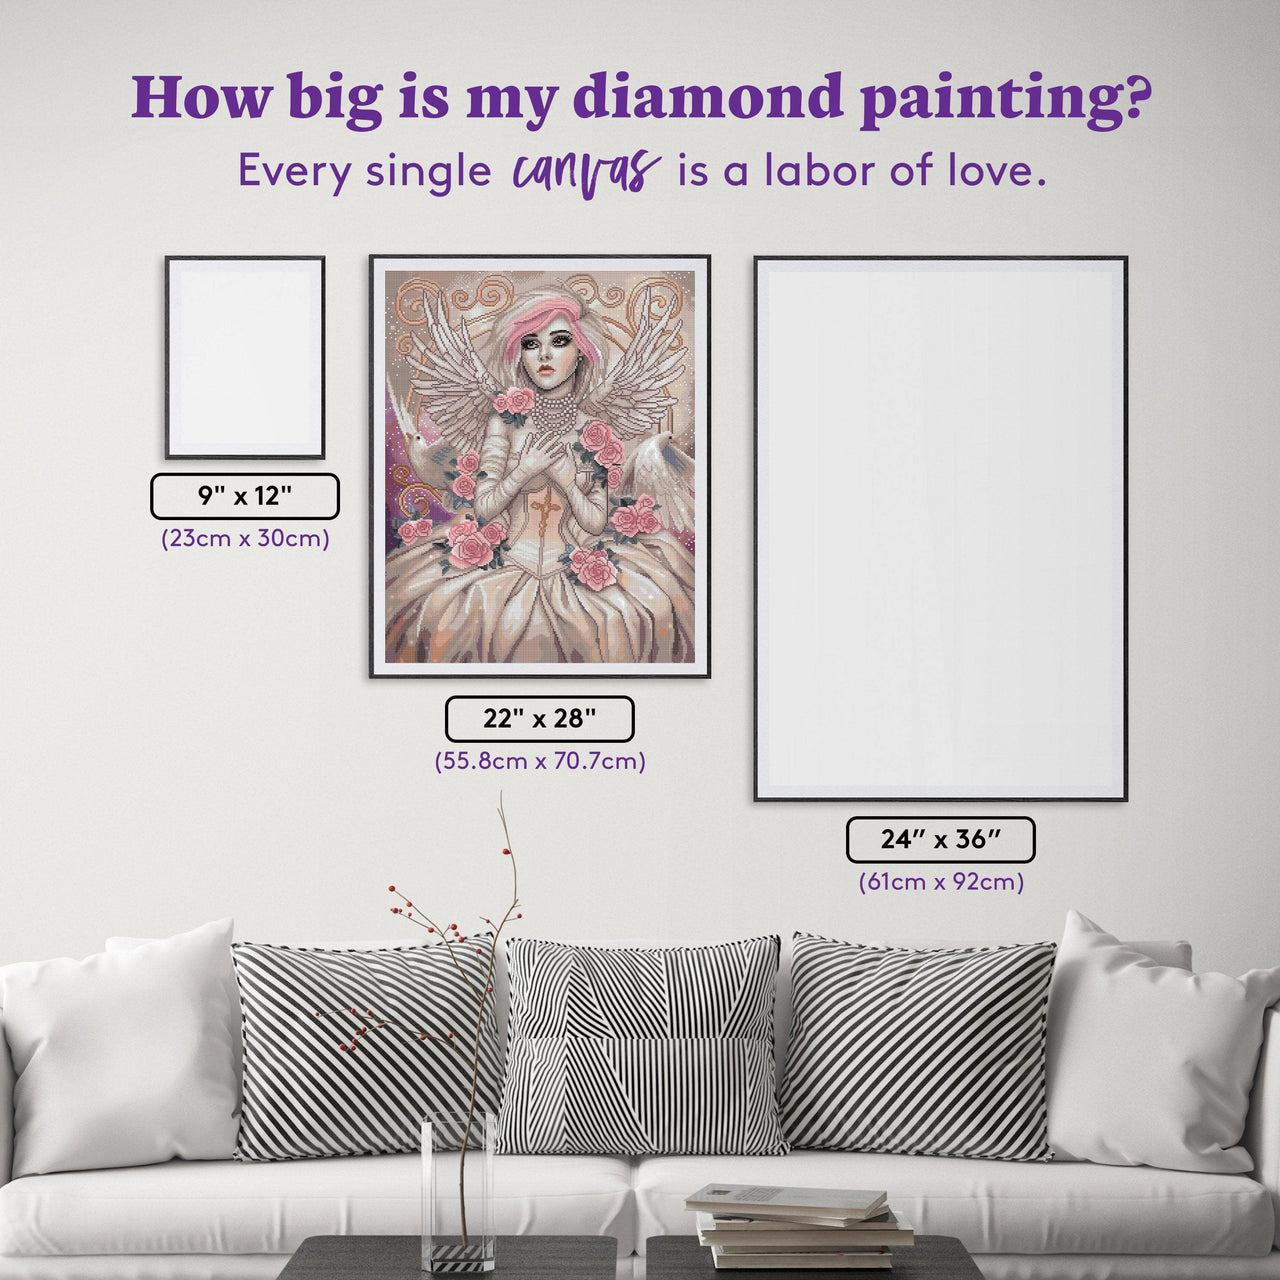 Diamond Painting Purity 22" x 28" (55.8cm x 70.7cm) / Square with 46 Colors including 2 ABs and 2 Fairy Dust Diamonds / 63,616